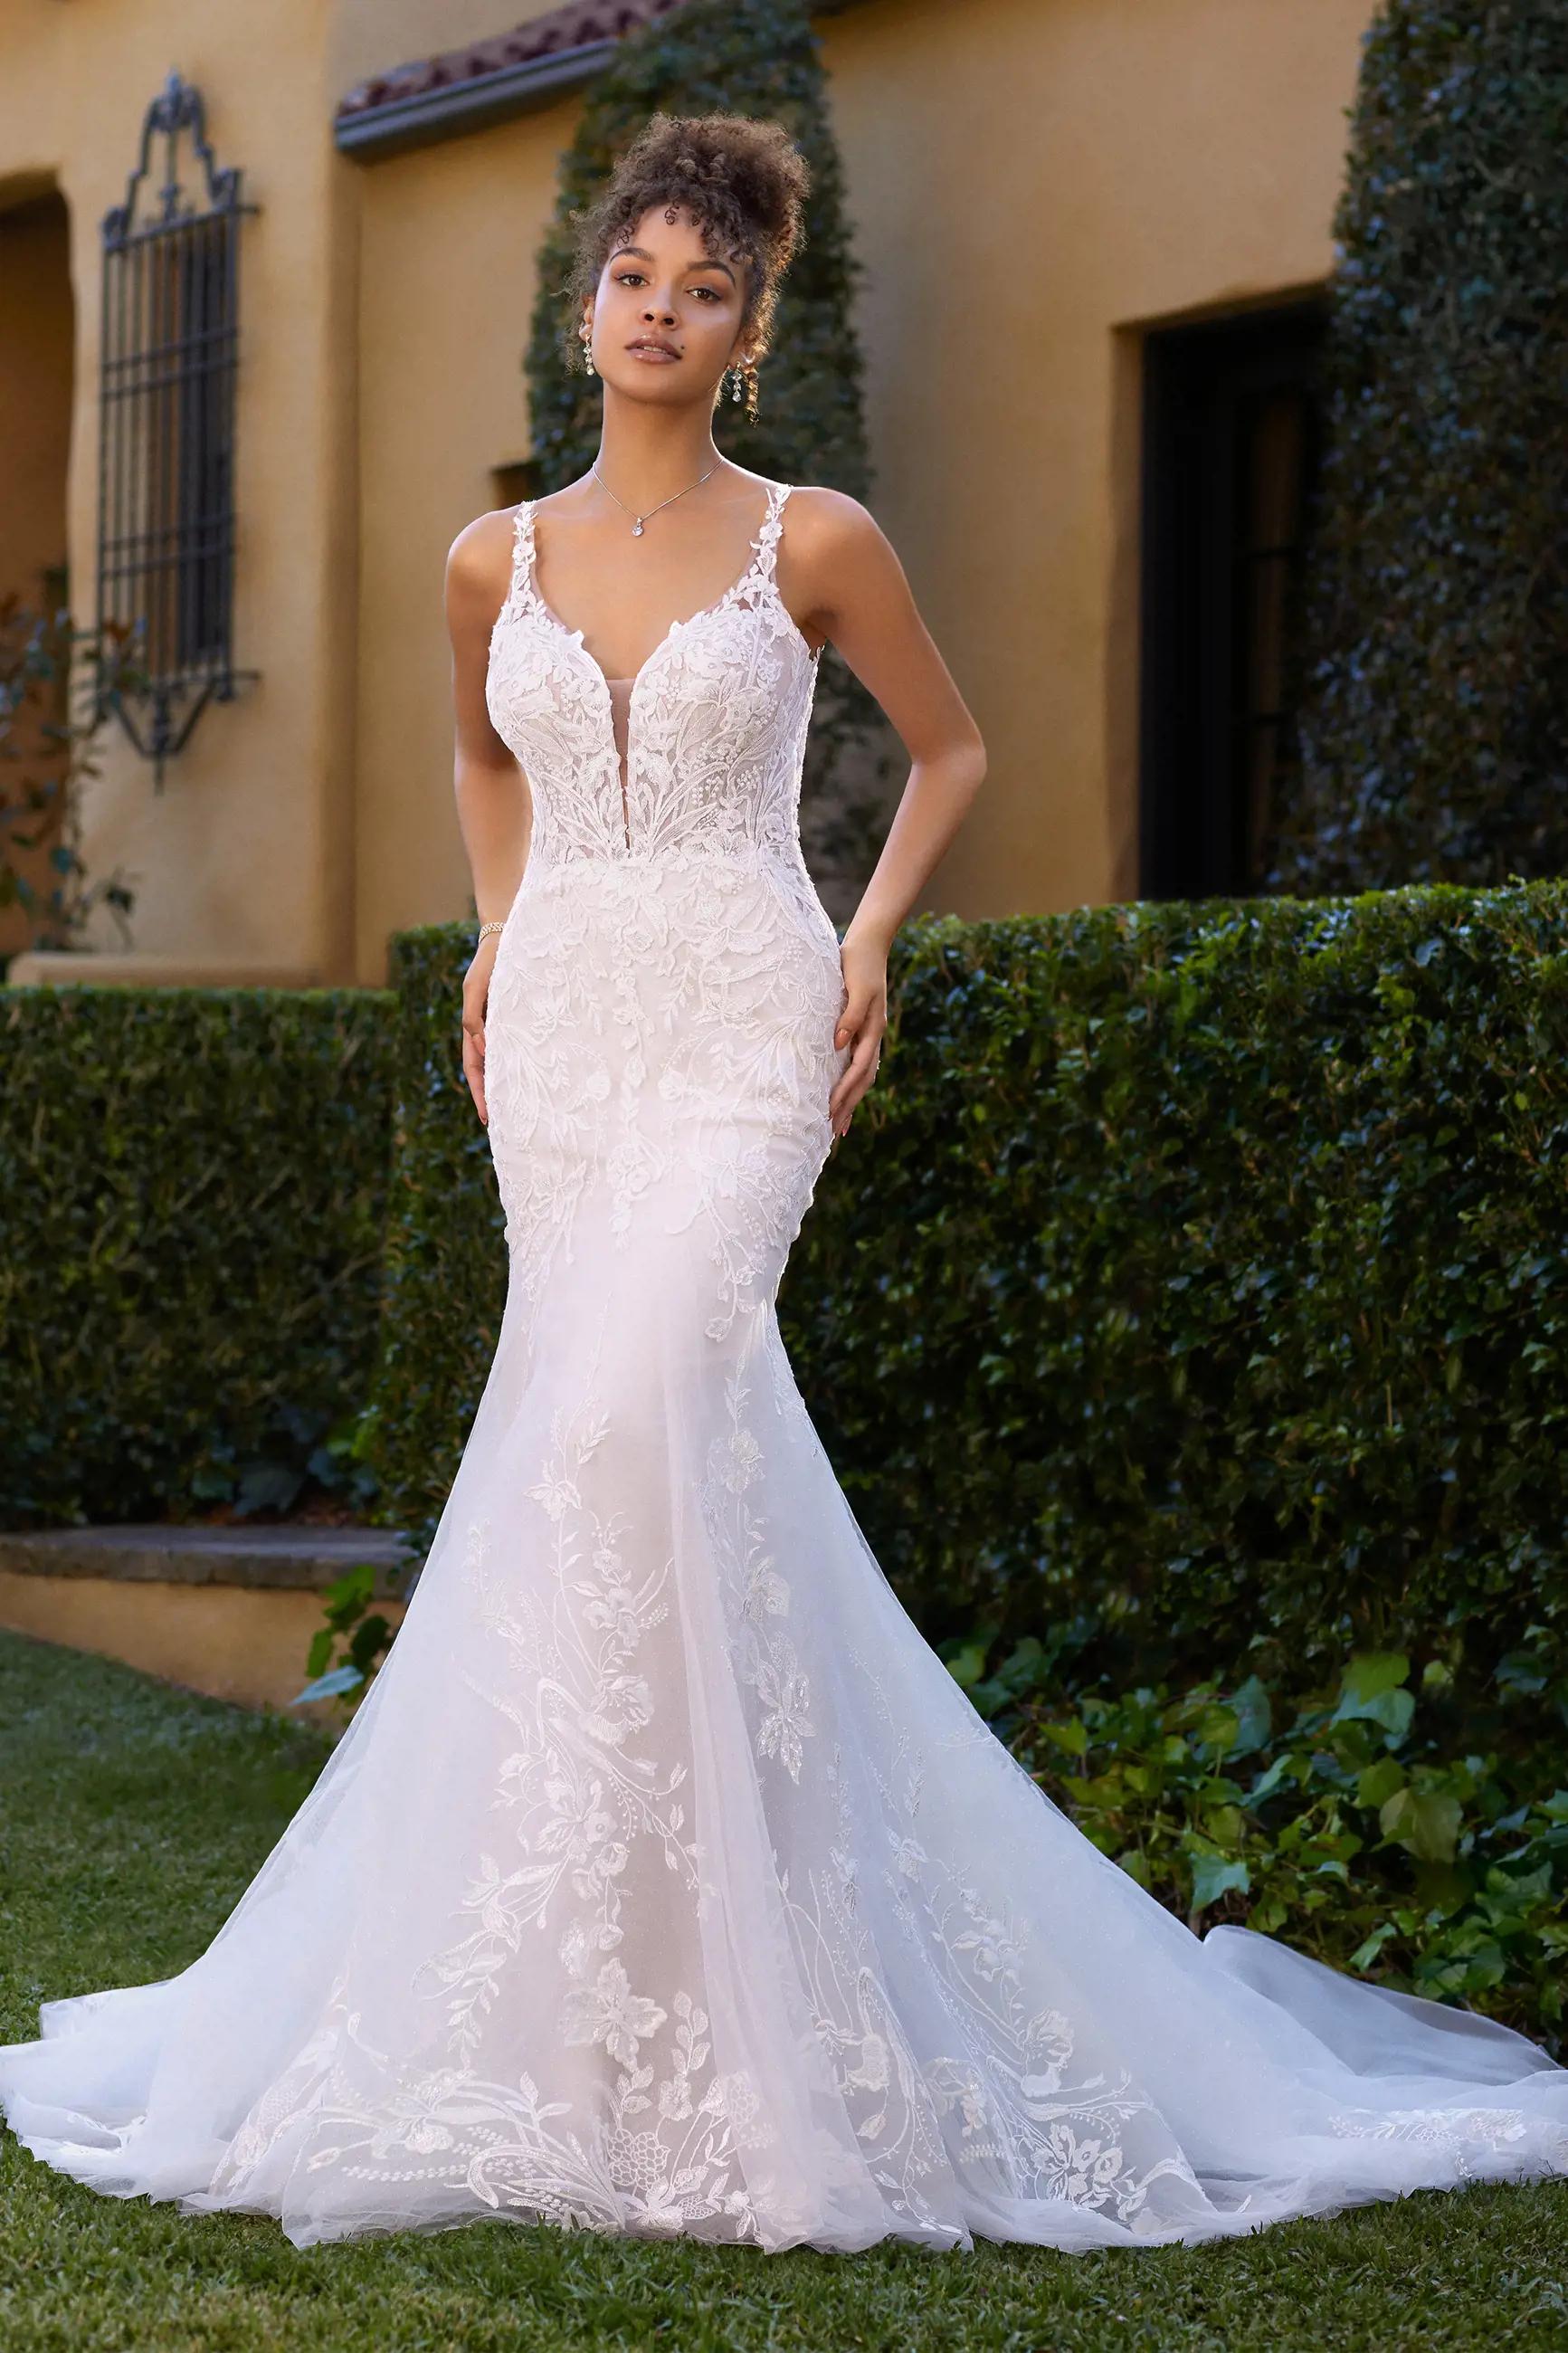 Dreamy Bridal Gown with Fitted Skirt Jackson $1 autoplay loop mute thumbnail